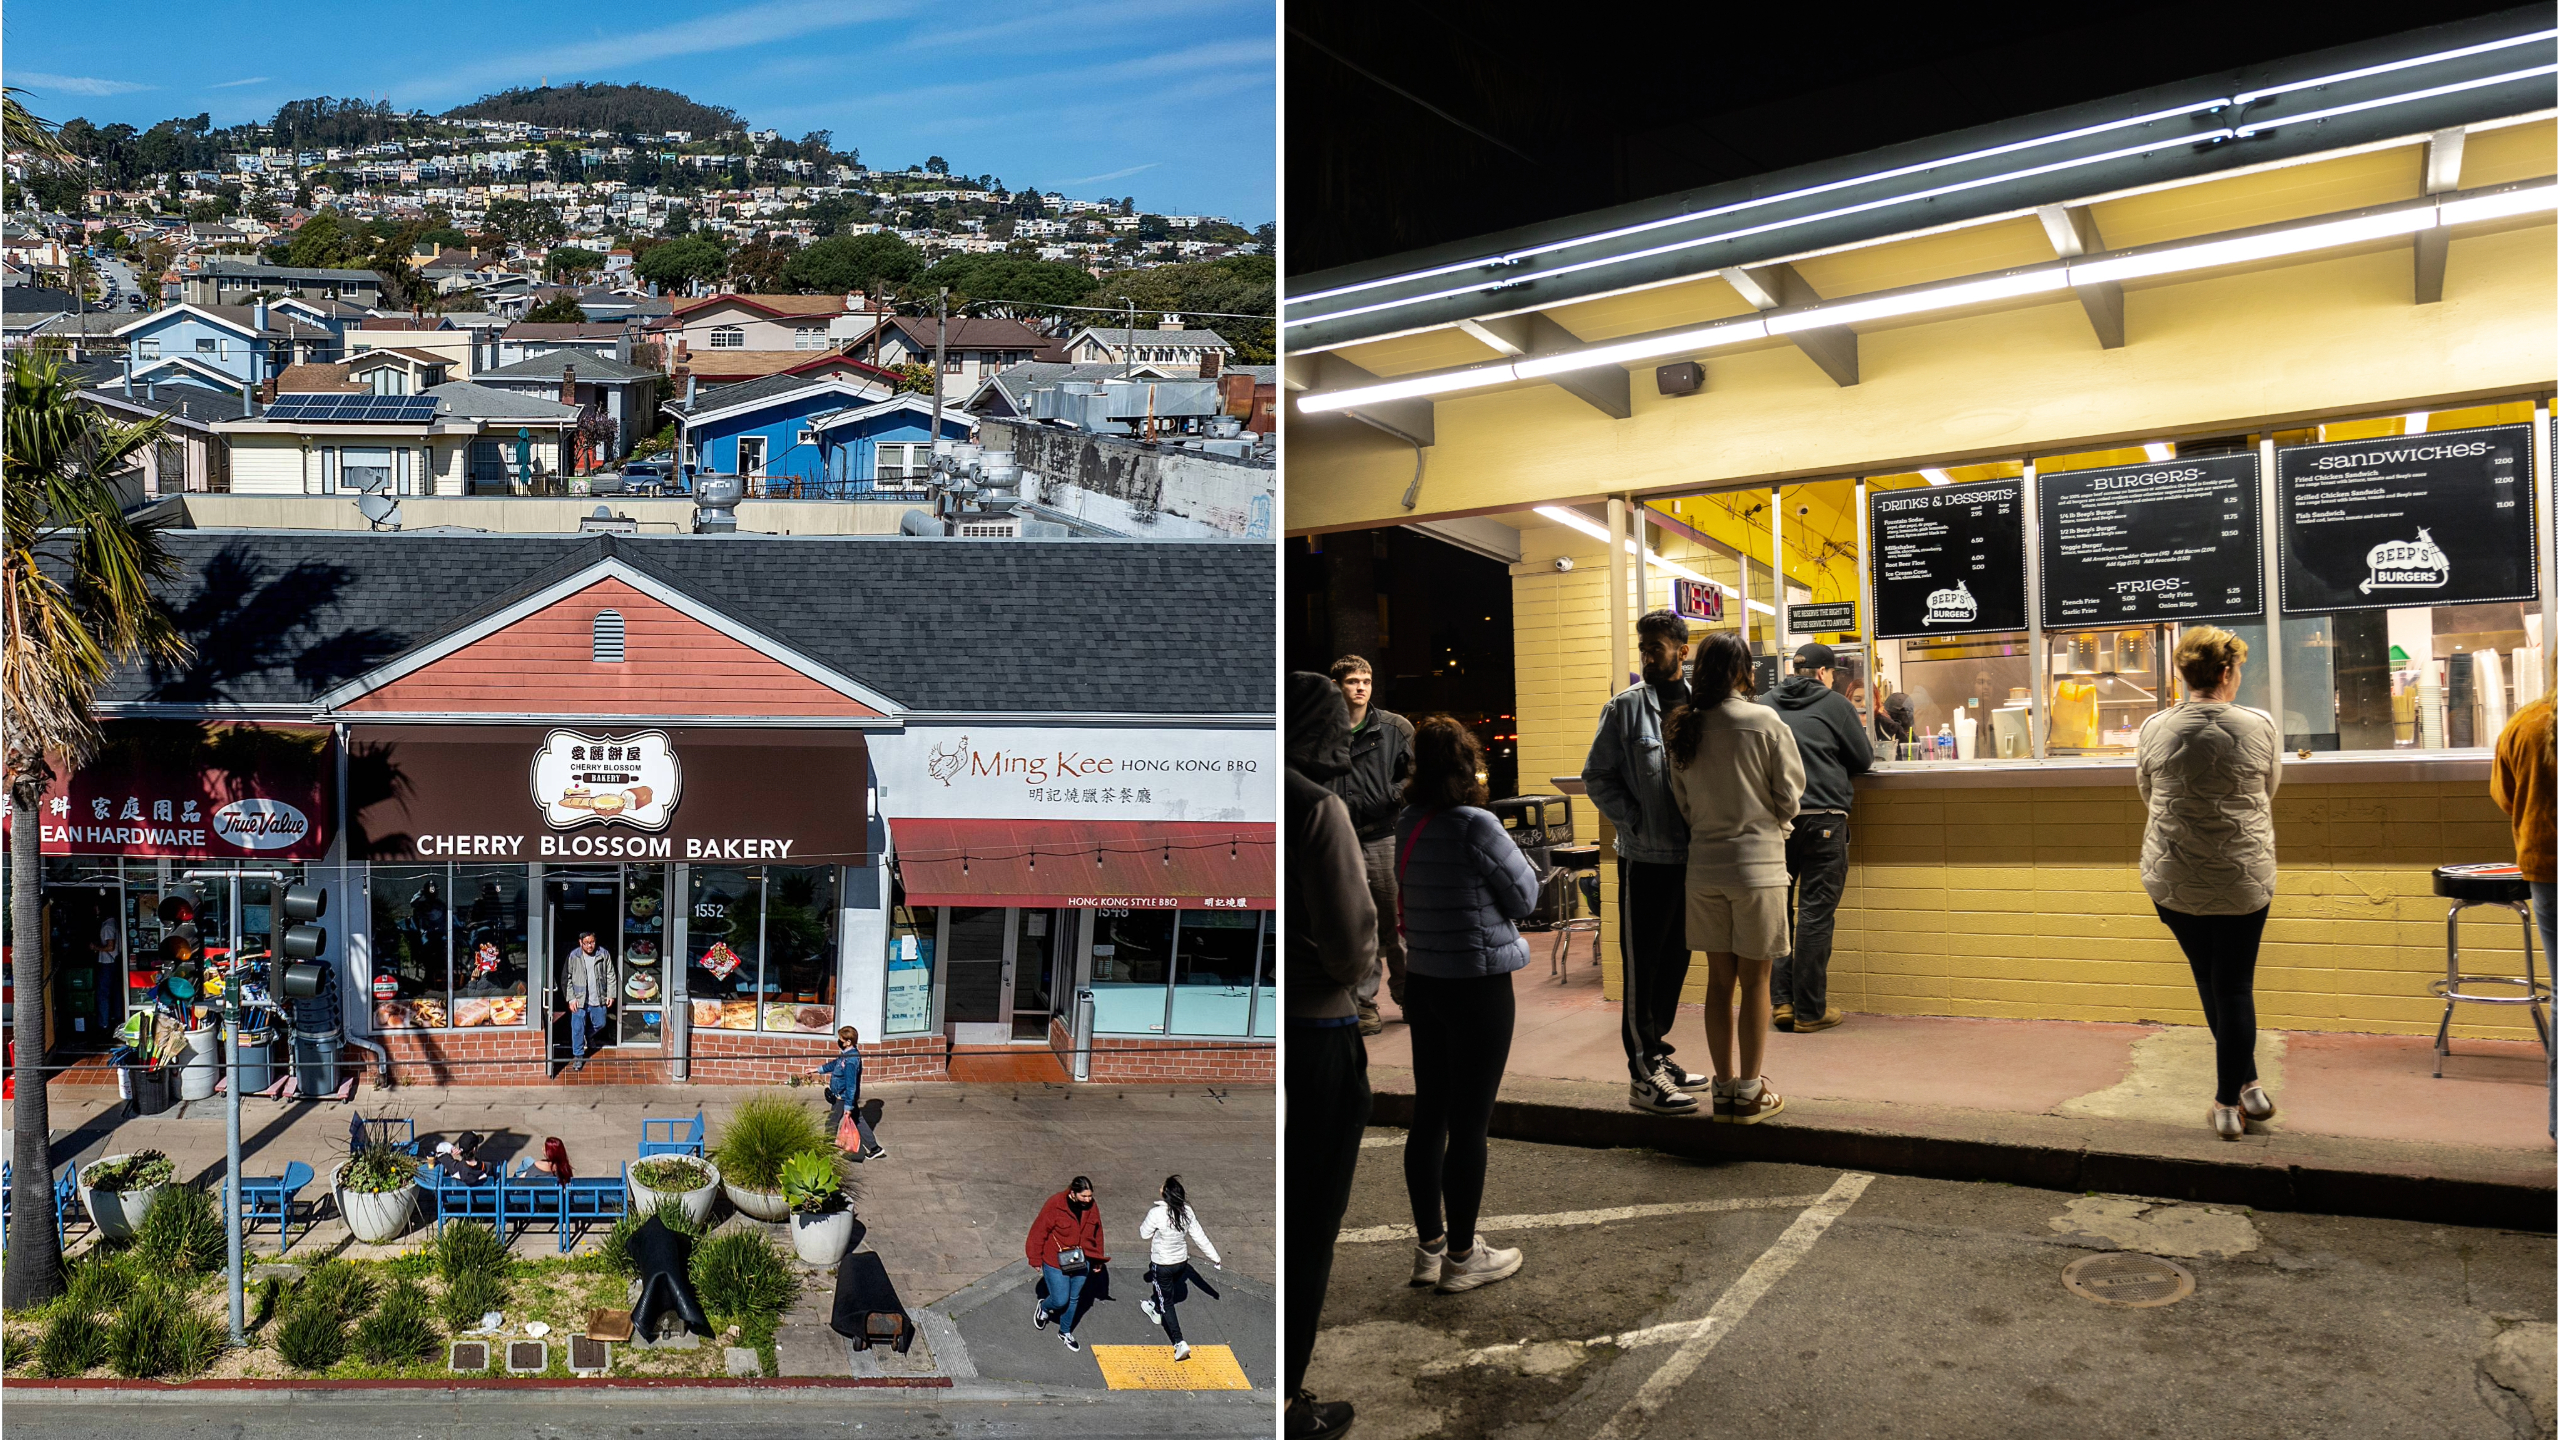 Left: Urban street with a bakery in the foreground, houses on a hill in the background. Right: People queued at an outdoor fast-food counter at night.